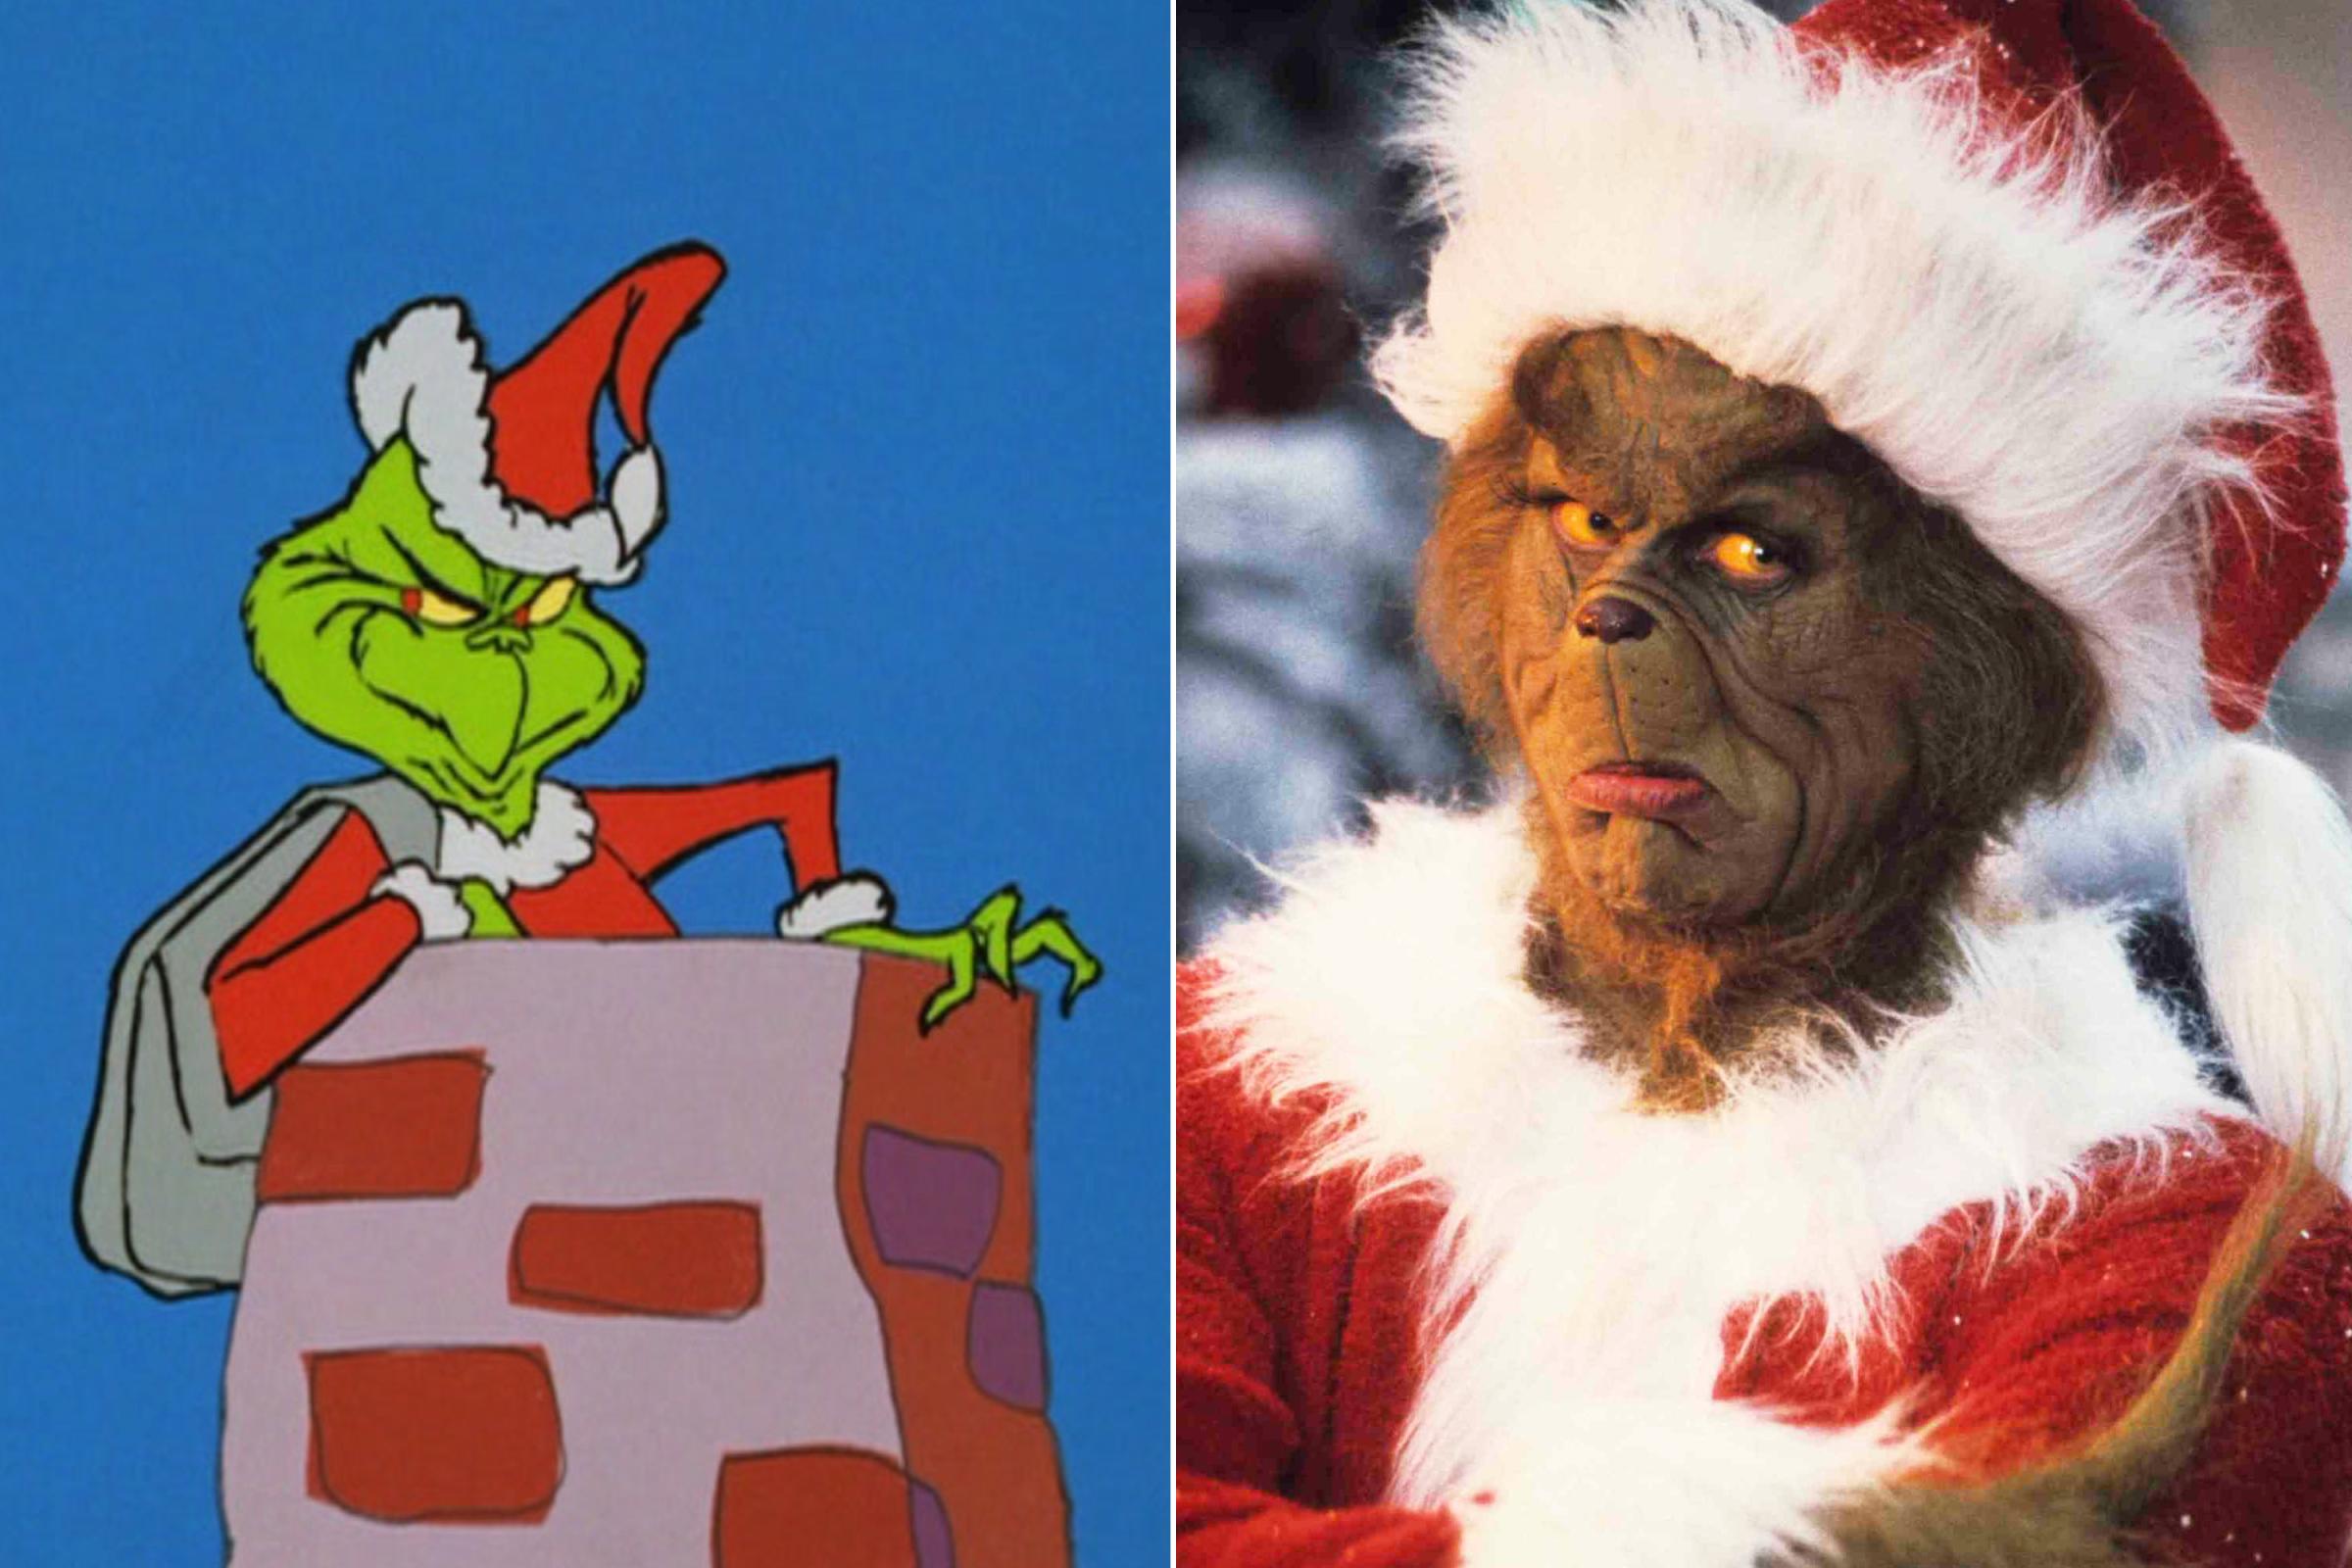 Dr. Seuss' How the Grinch Stole Christmas!, 1966 and Dr. Seuss' How the Grinch Stole Christmas, 2000.